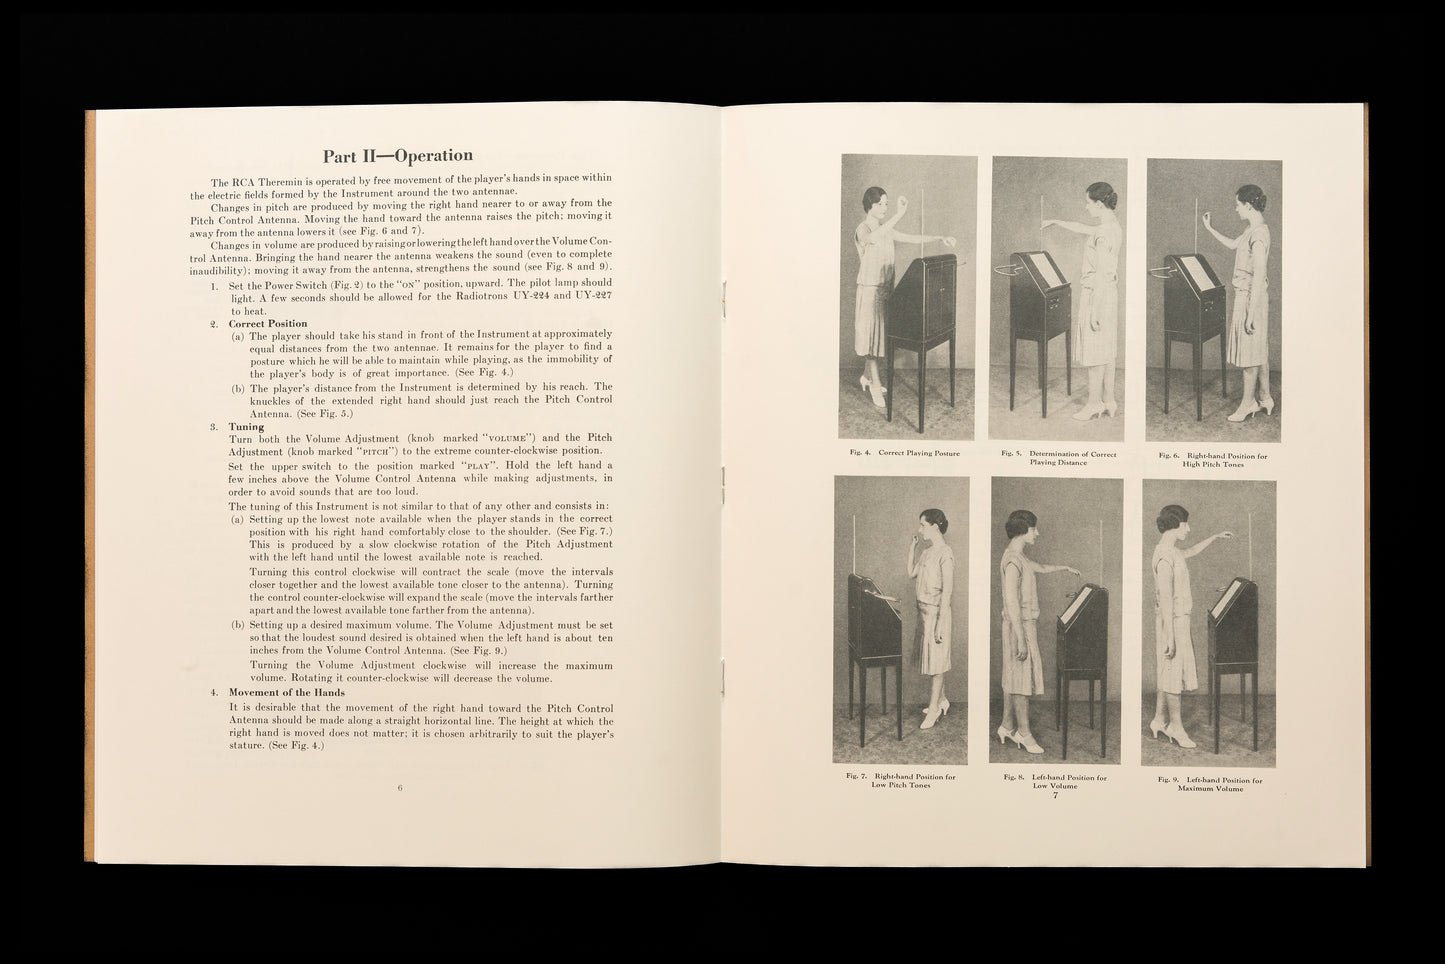 RCA Theremin Owner's Manual